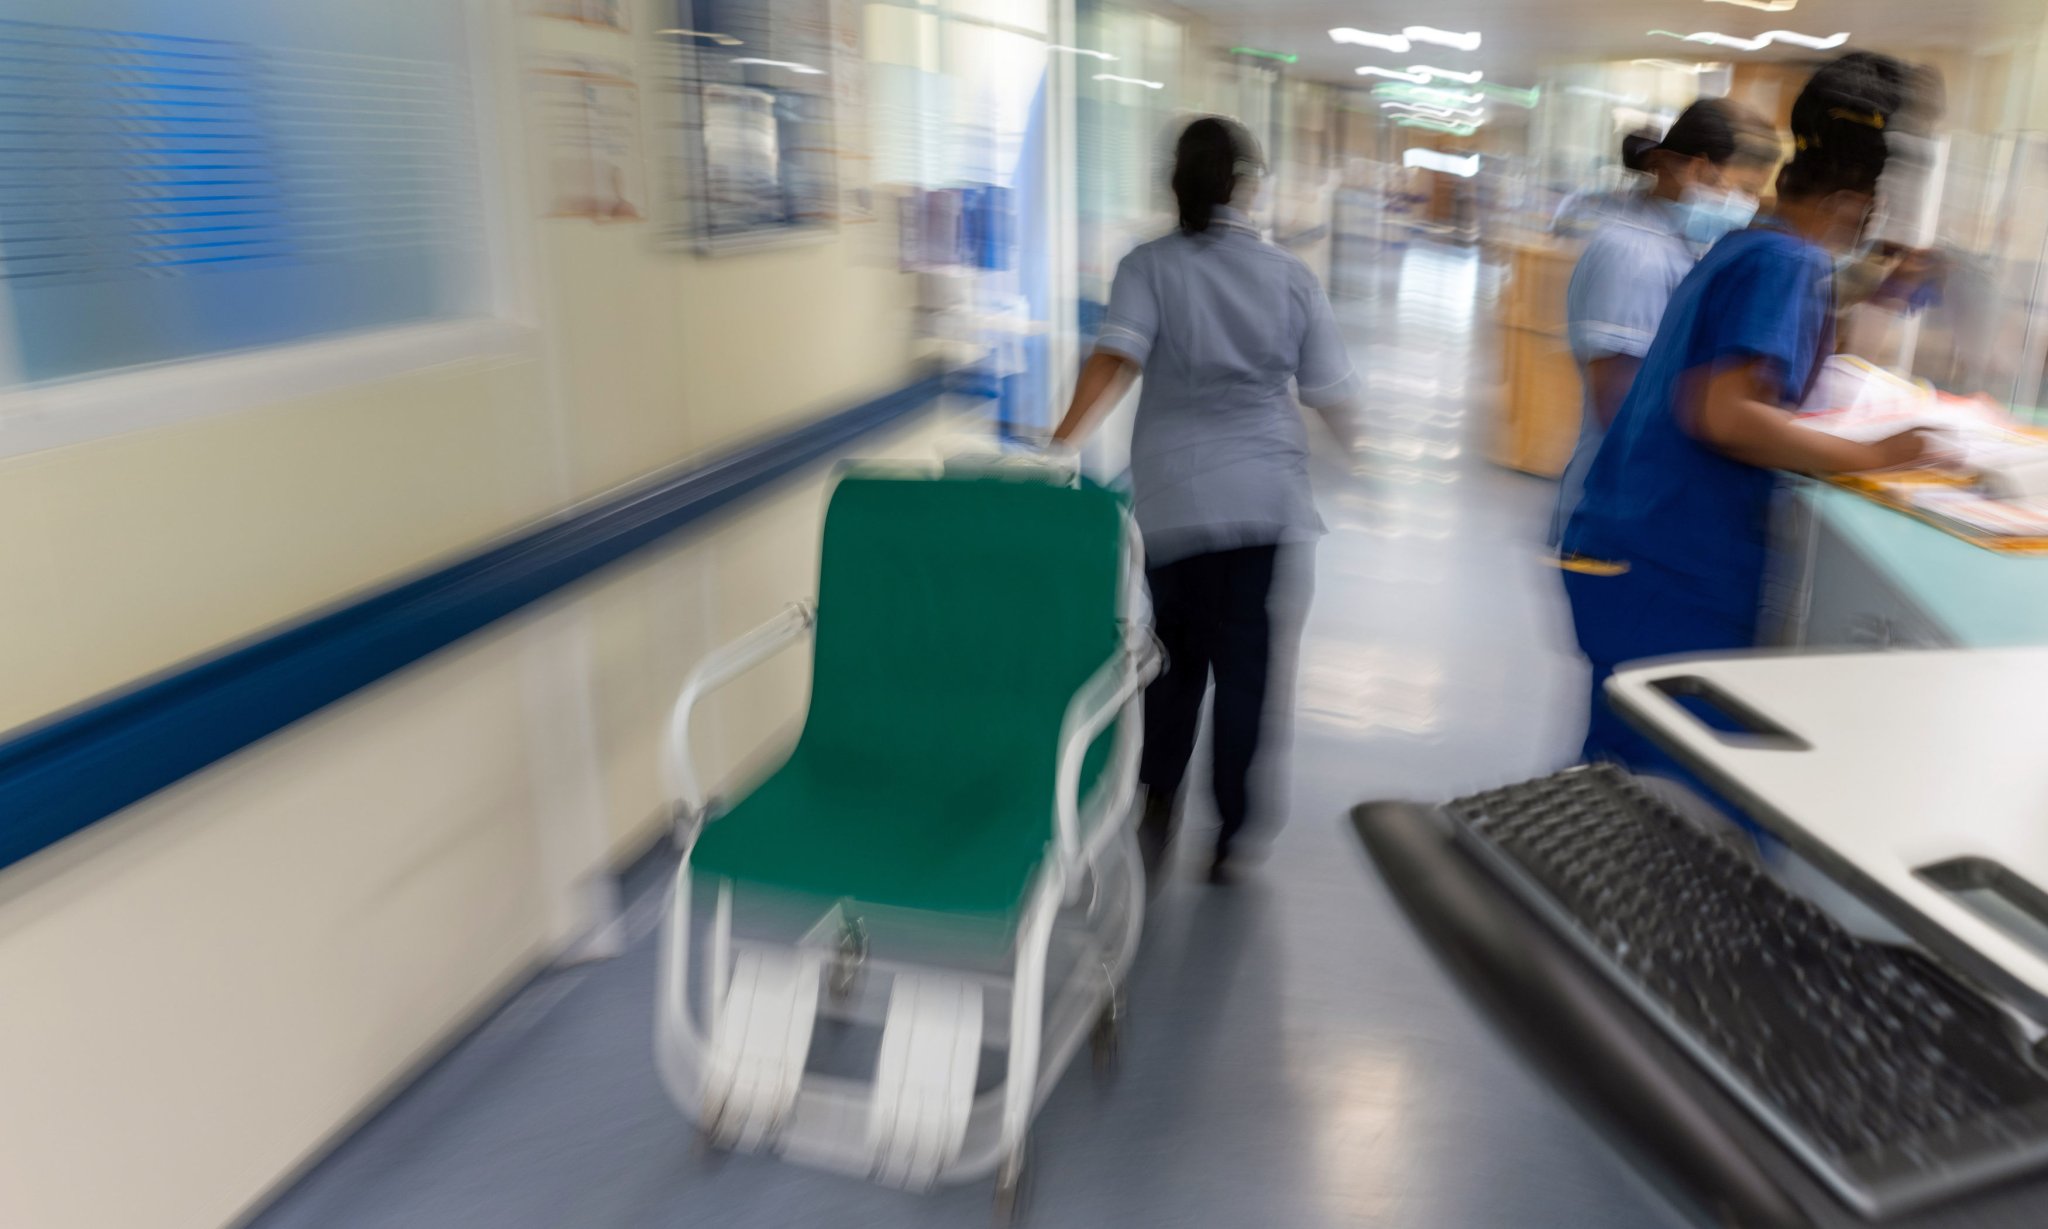 Revealed: record 170,000 staff leave NHS in England as stress and workload take toll